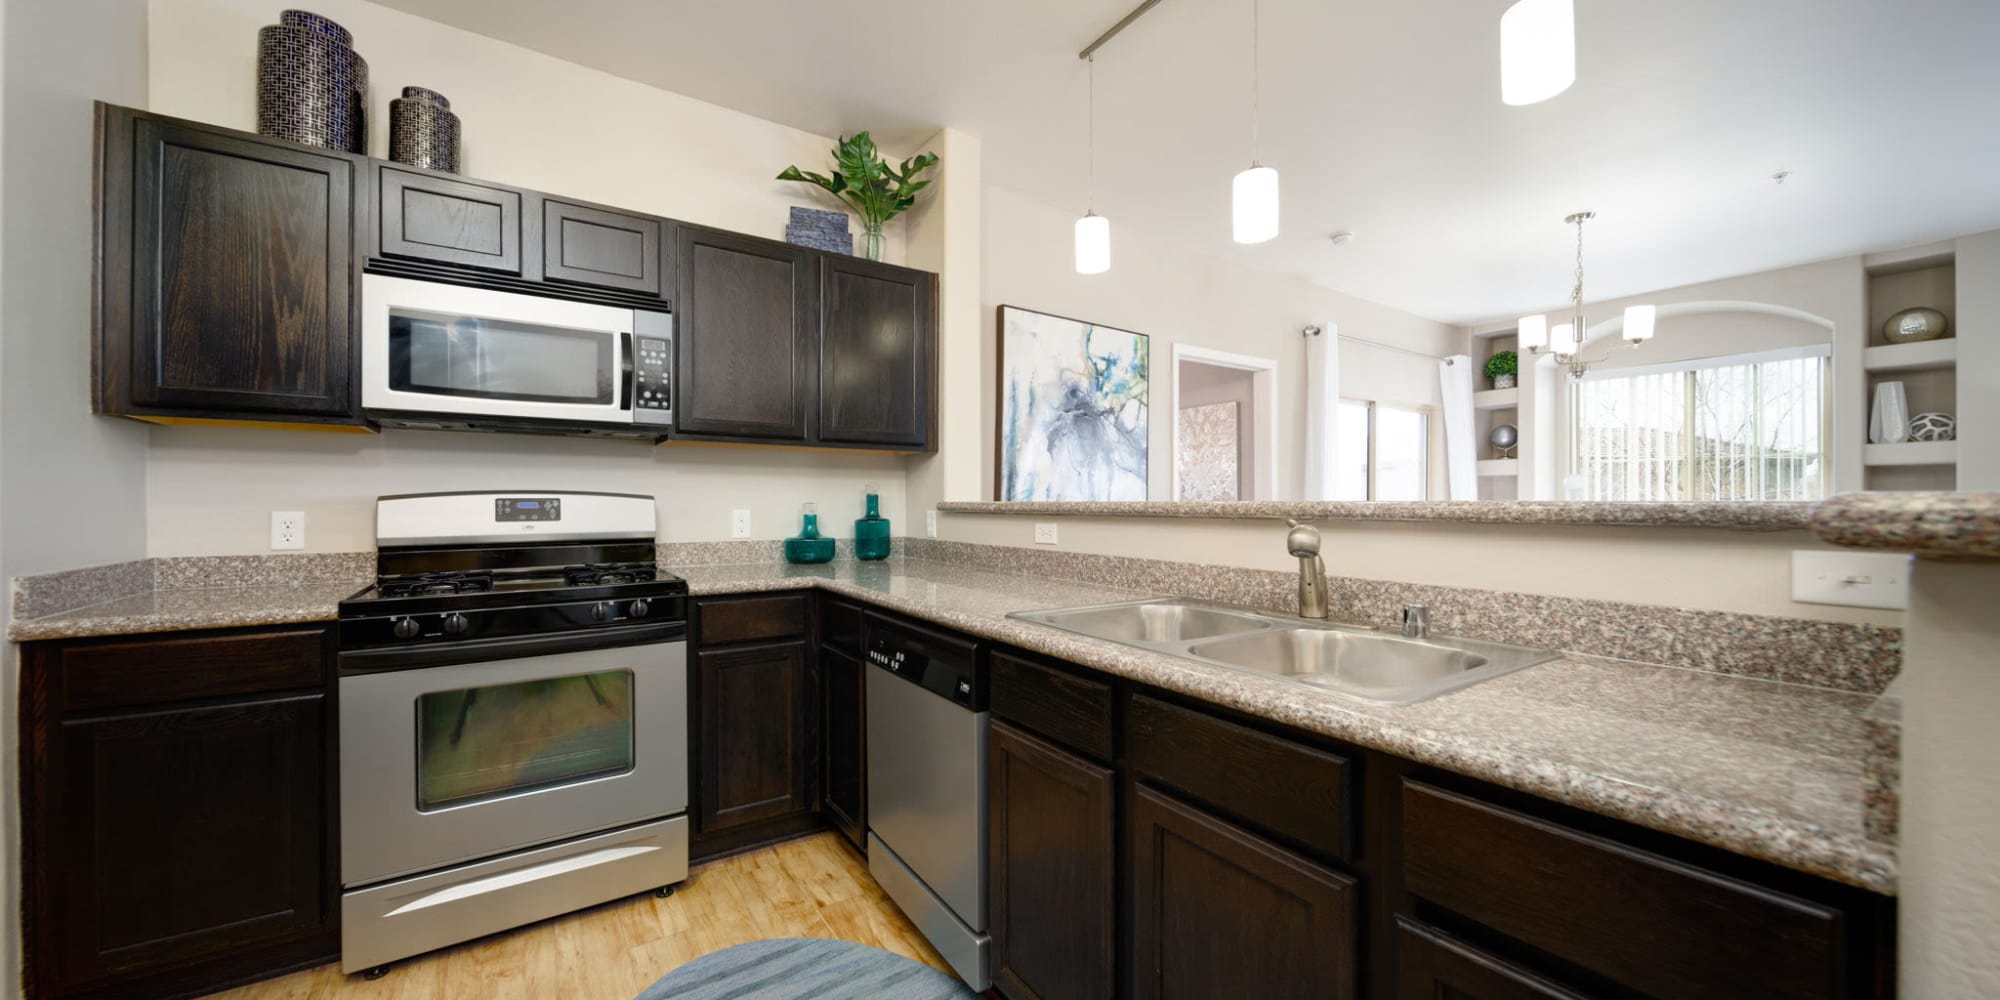 Kitchen with granite countertops at The Trails at Pioneer Meadows in Sparks, Nevada